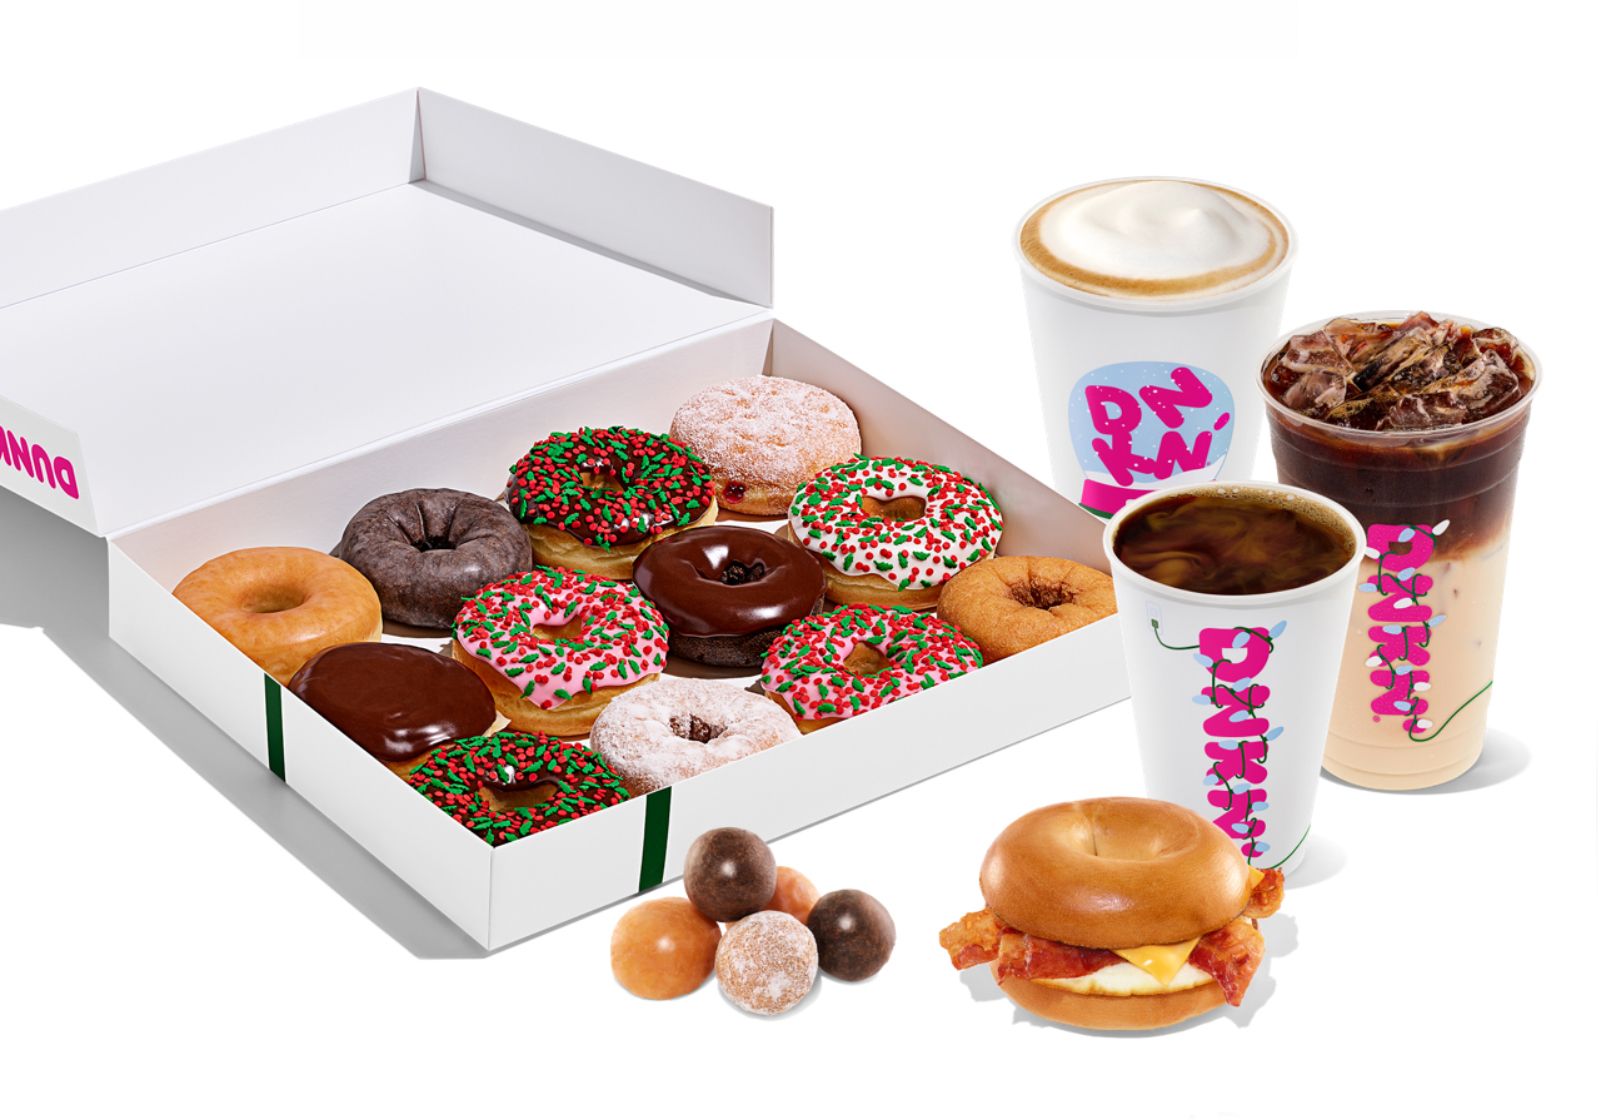 DashPass Members Can Get $5 Back on Their Next $20+ Dunkin’ Donuts DoorDash Order for a Limited Time